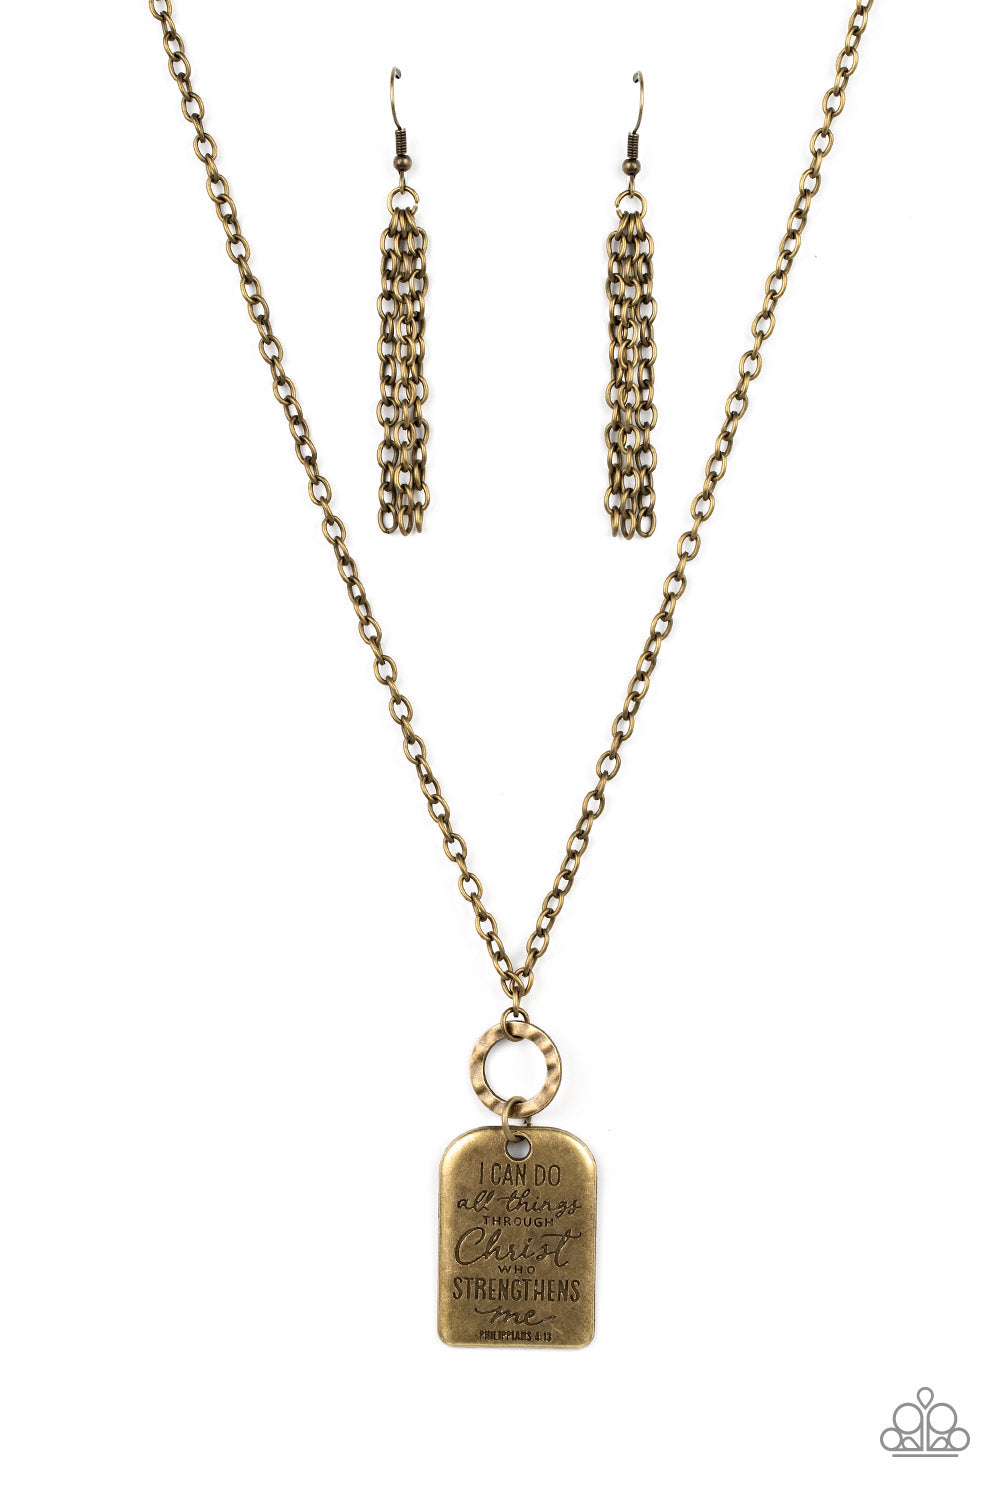 Persevering Philippians - Brass Necklace - Paparazzi Accessories